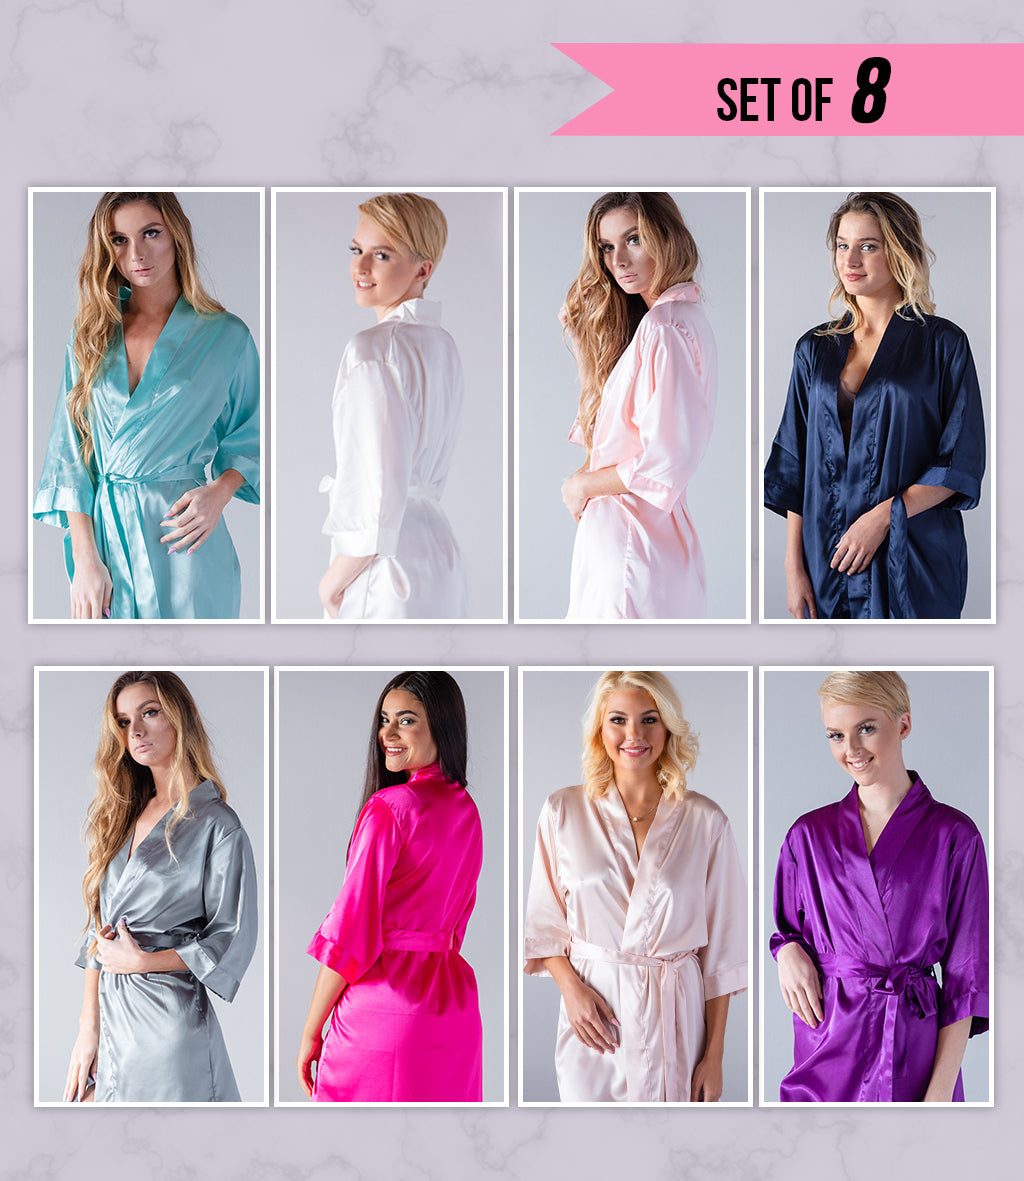 Set of 8 Robes - Plain, Floral, and Lace Robes